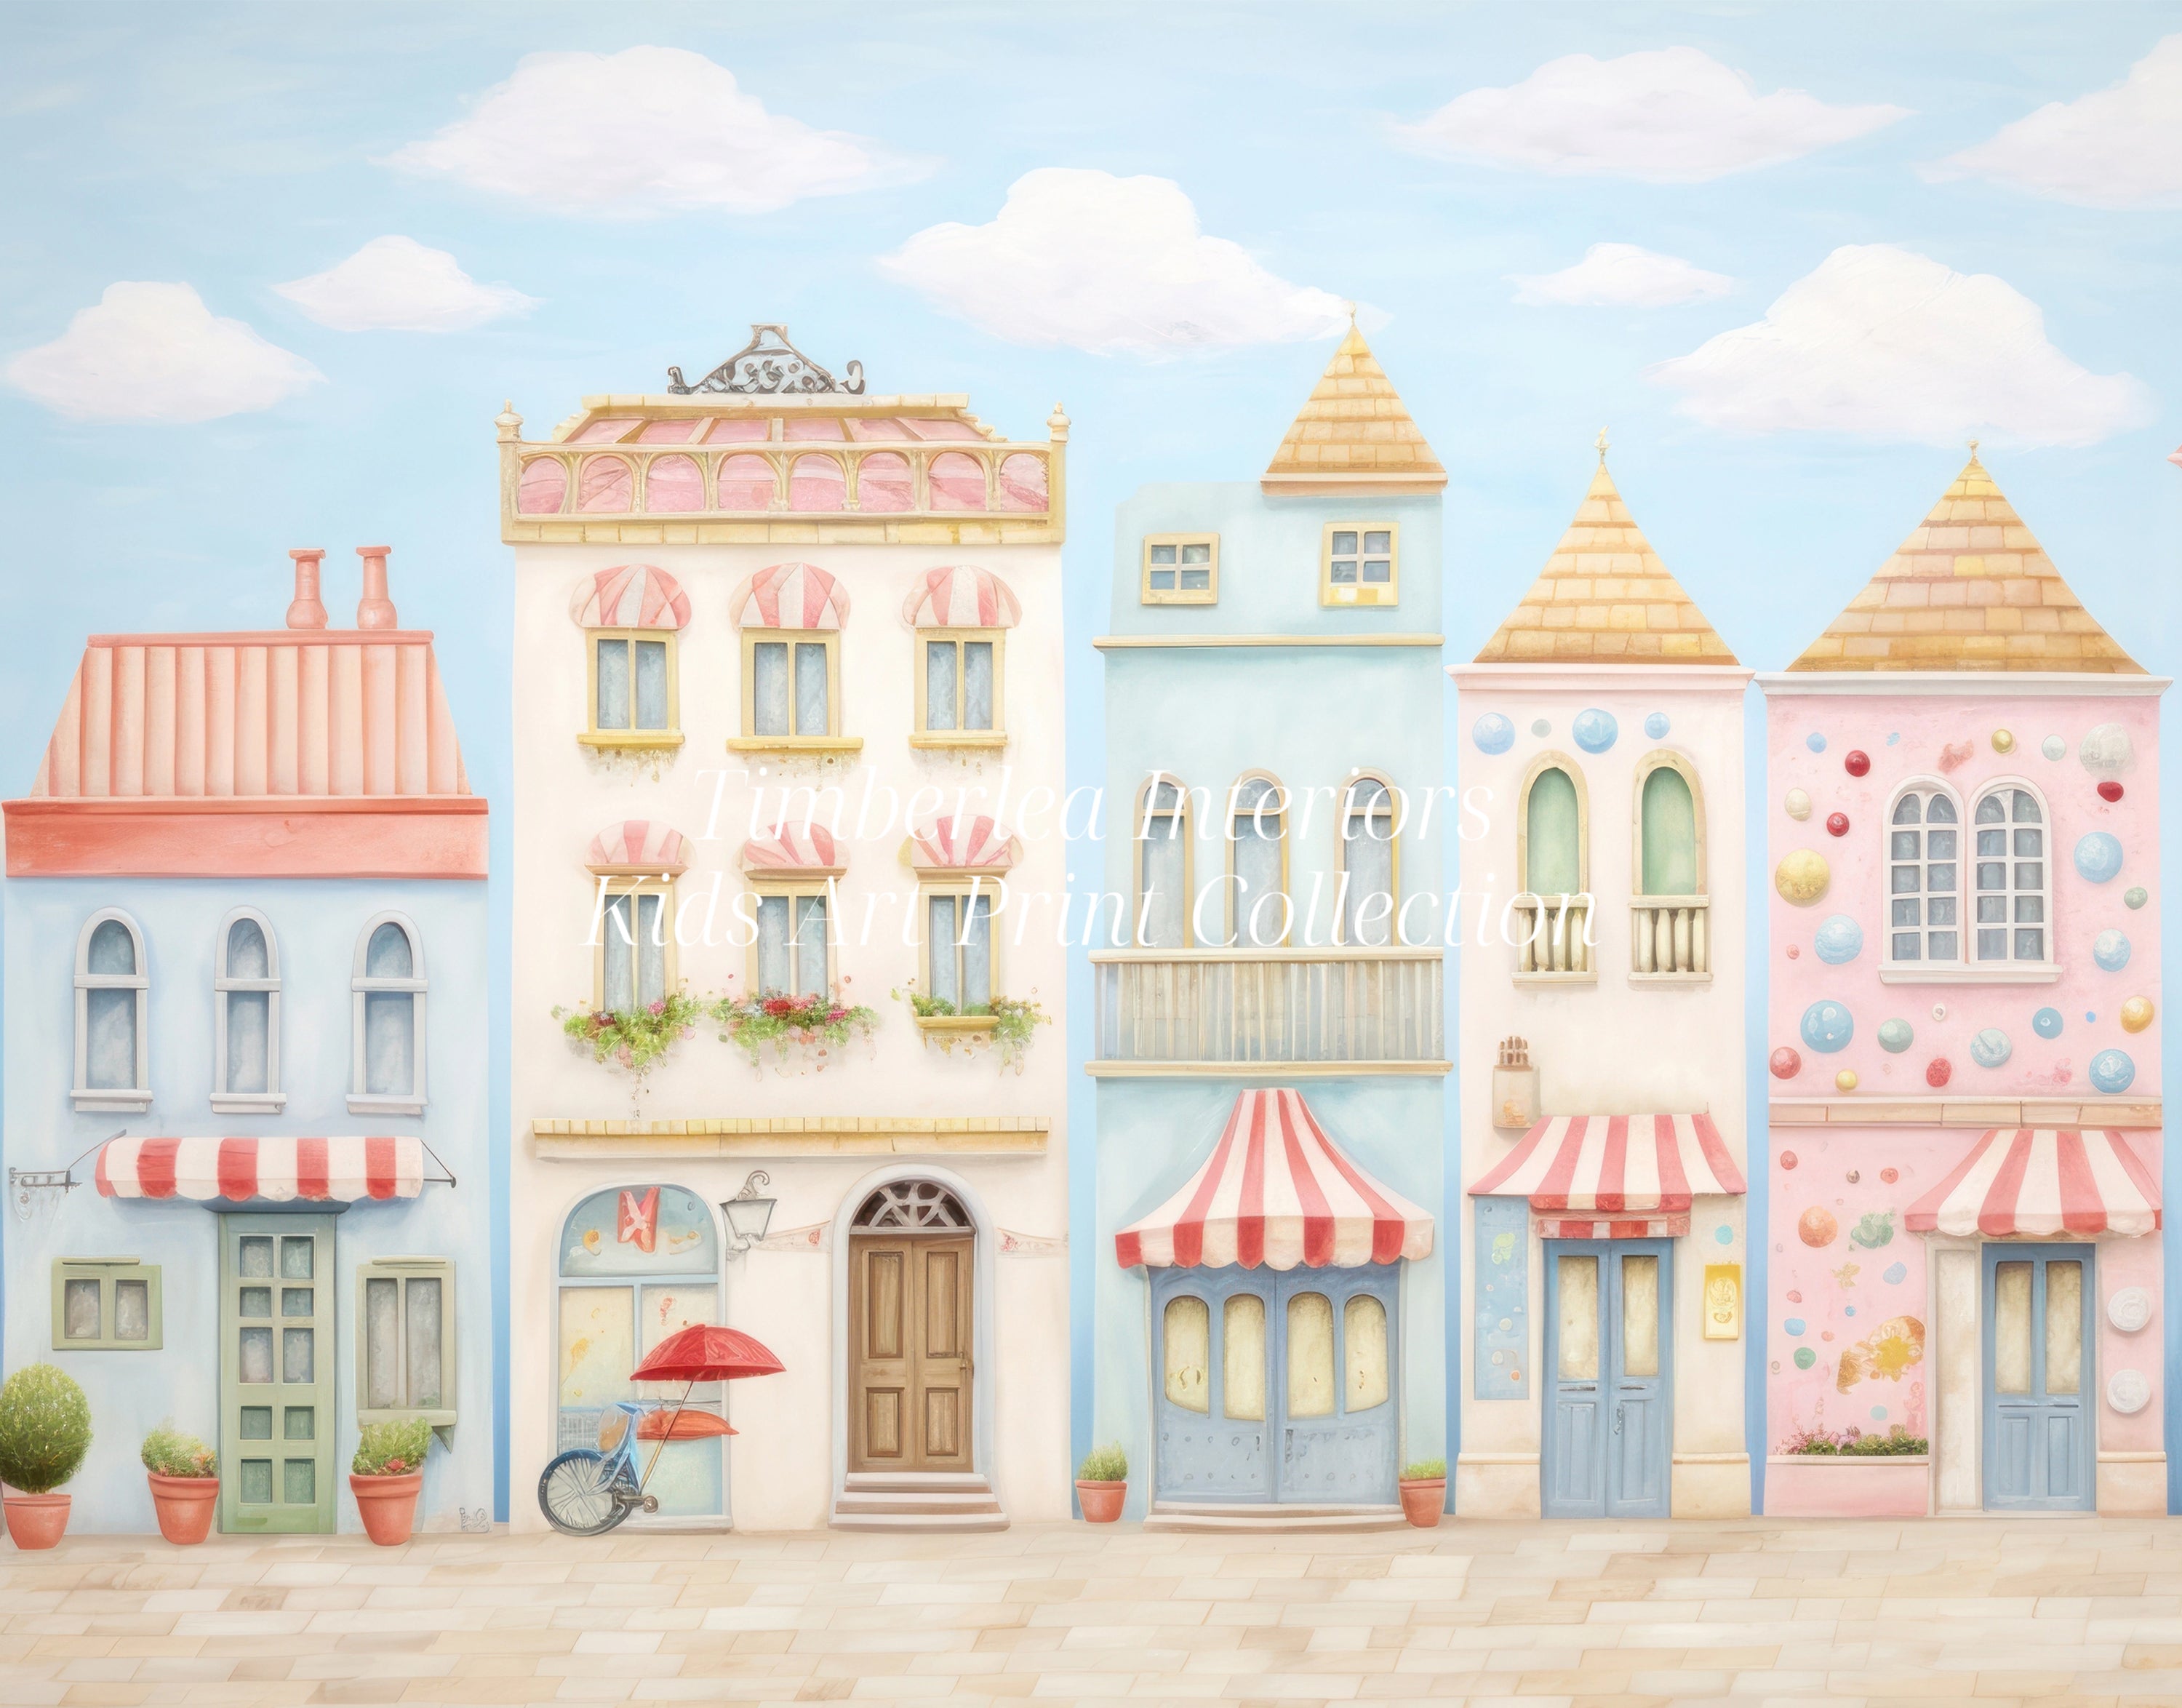 A delightful art print of pastel-colored townhouses mounted on a wooden board. The scene features various architectural styles with colorful awnings and balconies against a backdrop of a blue sky with white clouds.